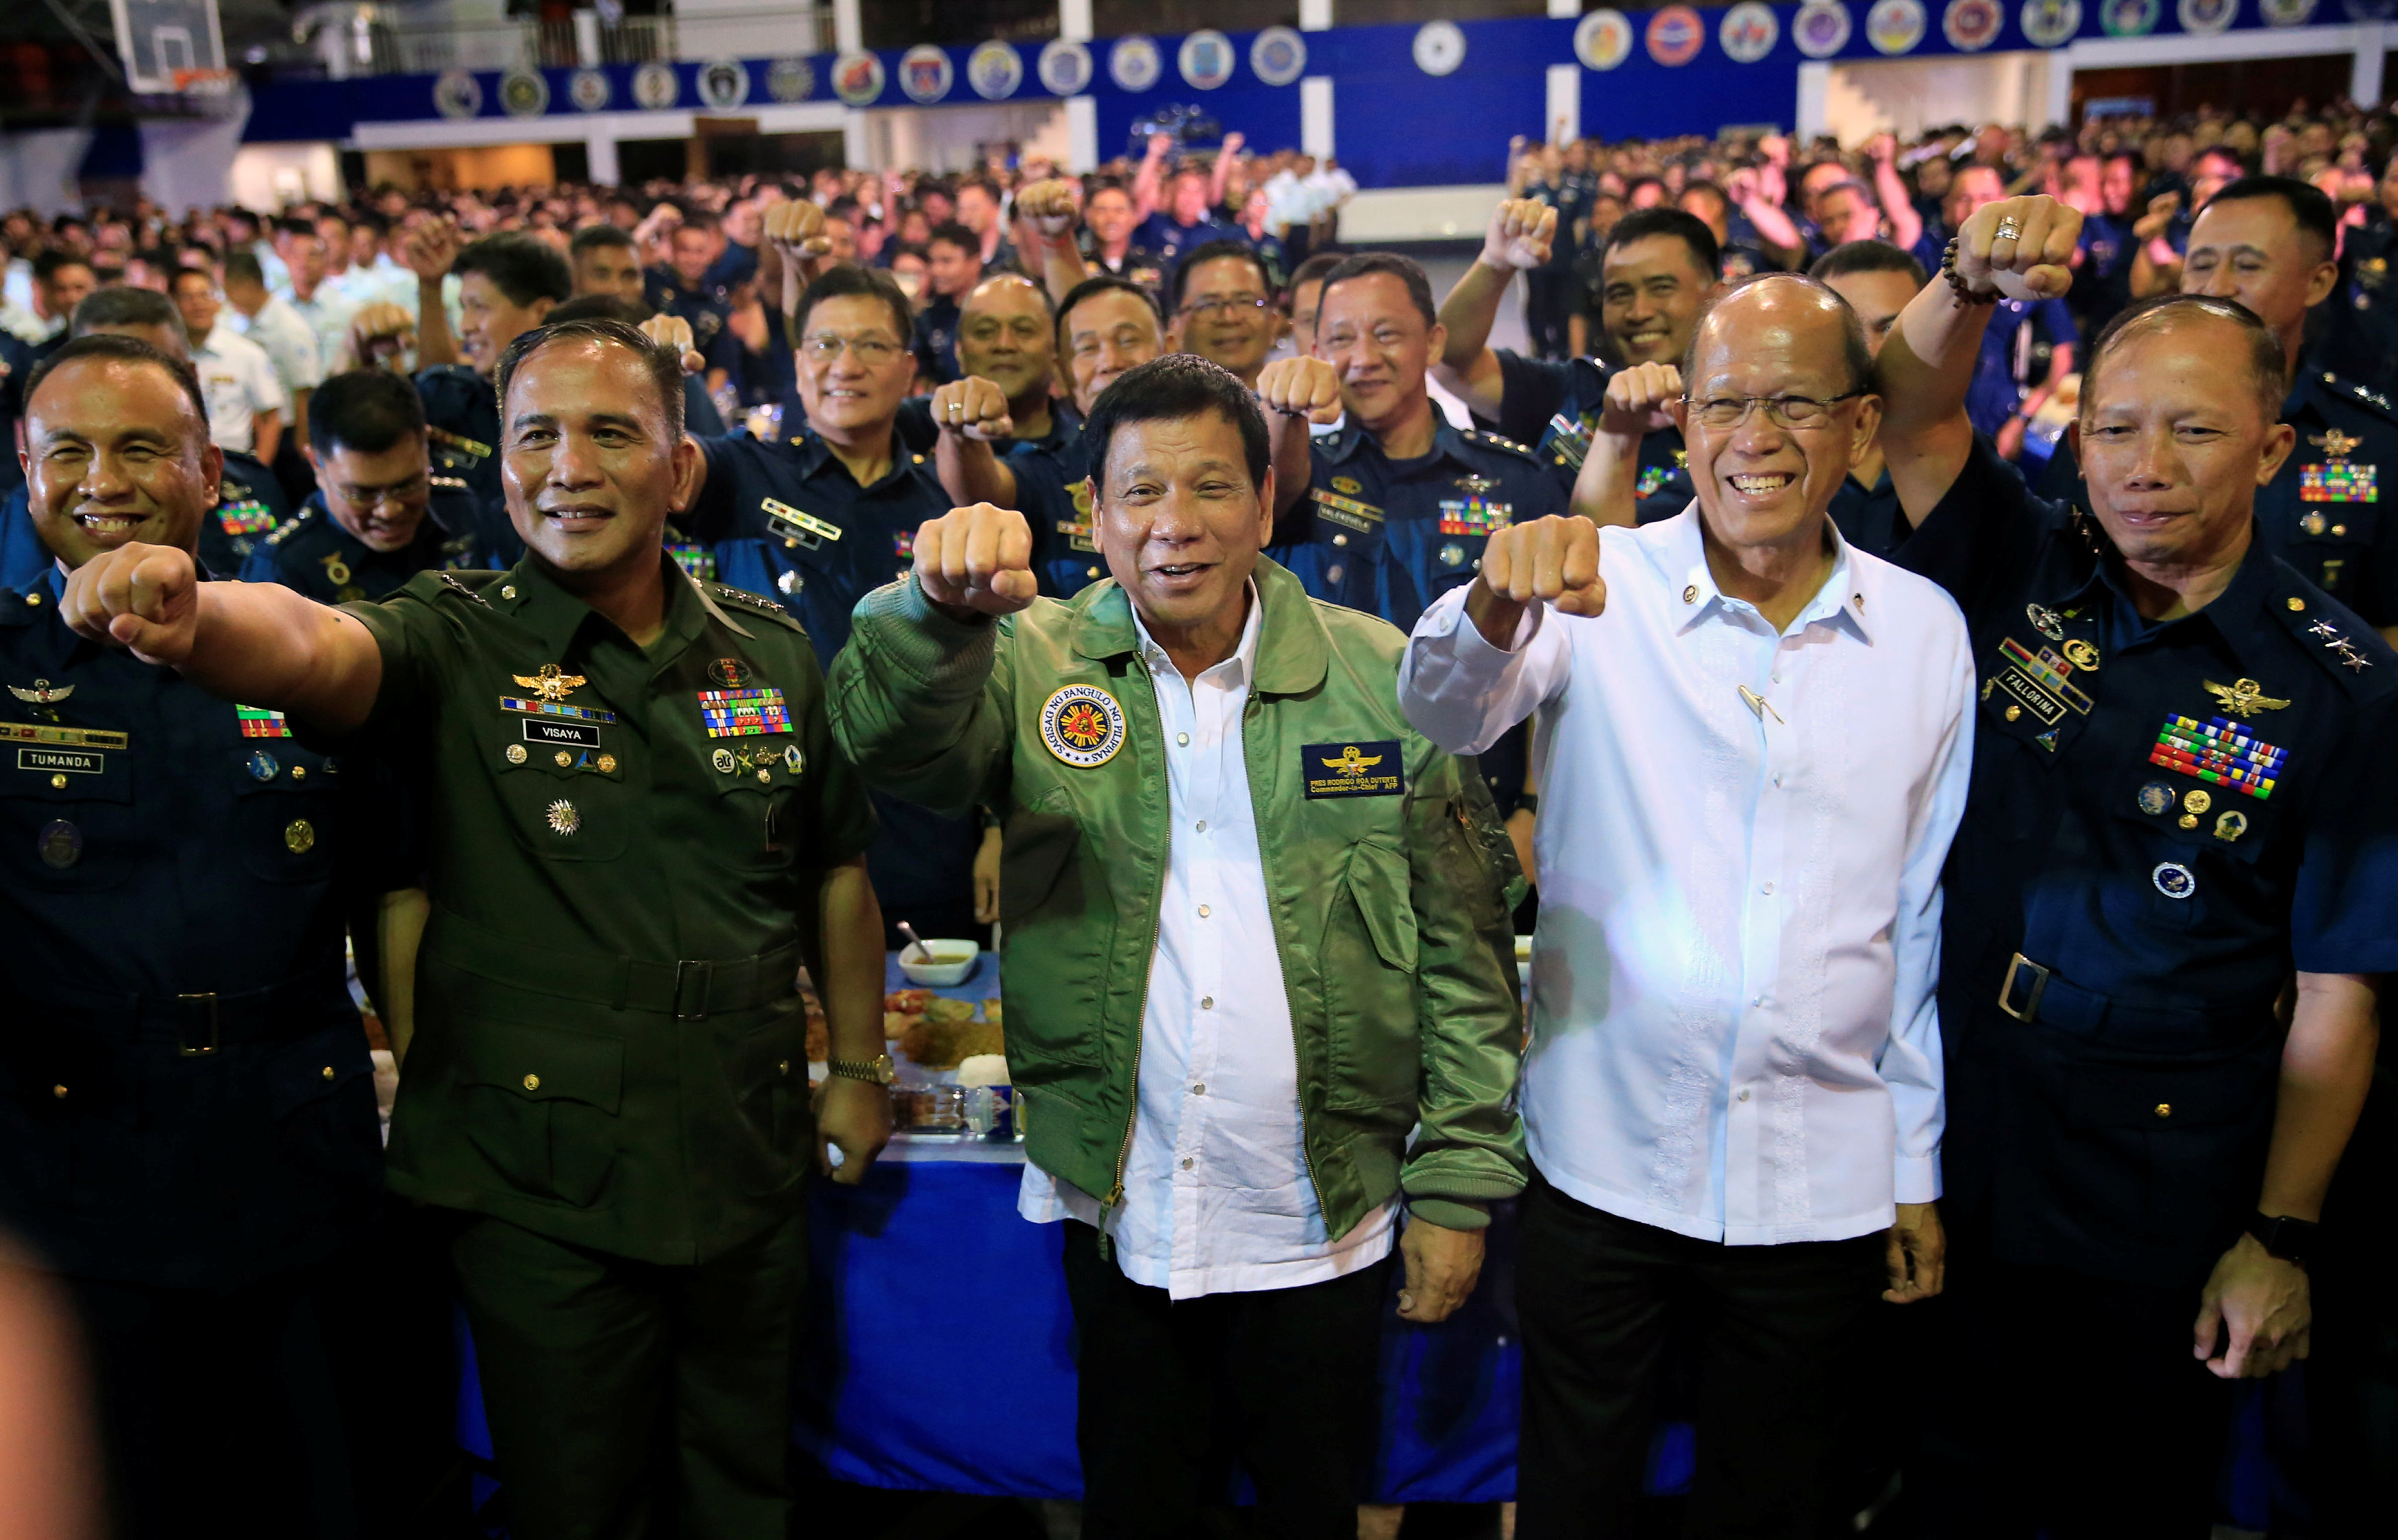 President Rodrigo Duterte (C) clenches fist along with other Philippine Air Force (PAF) officials during the 250th Presidential Airlift Wing (PAW) anniversary at the villamor air base in Pasay city, metro Manila, Philippines September 13, 2016. REUTERS/Ro